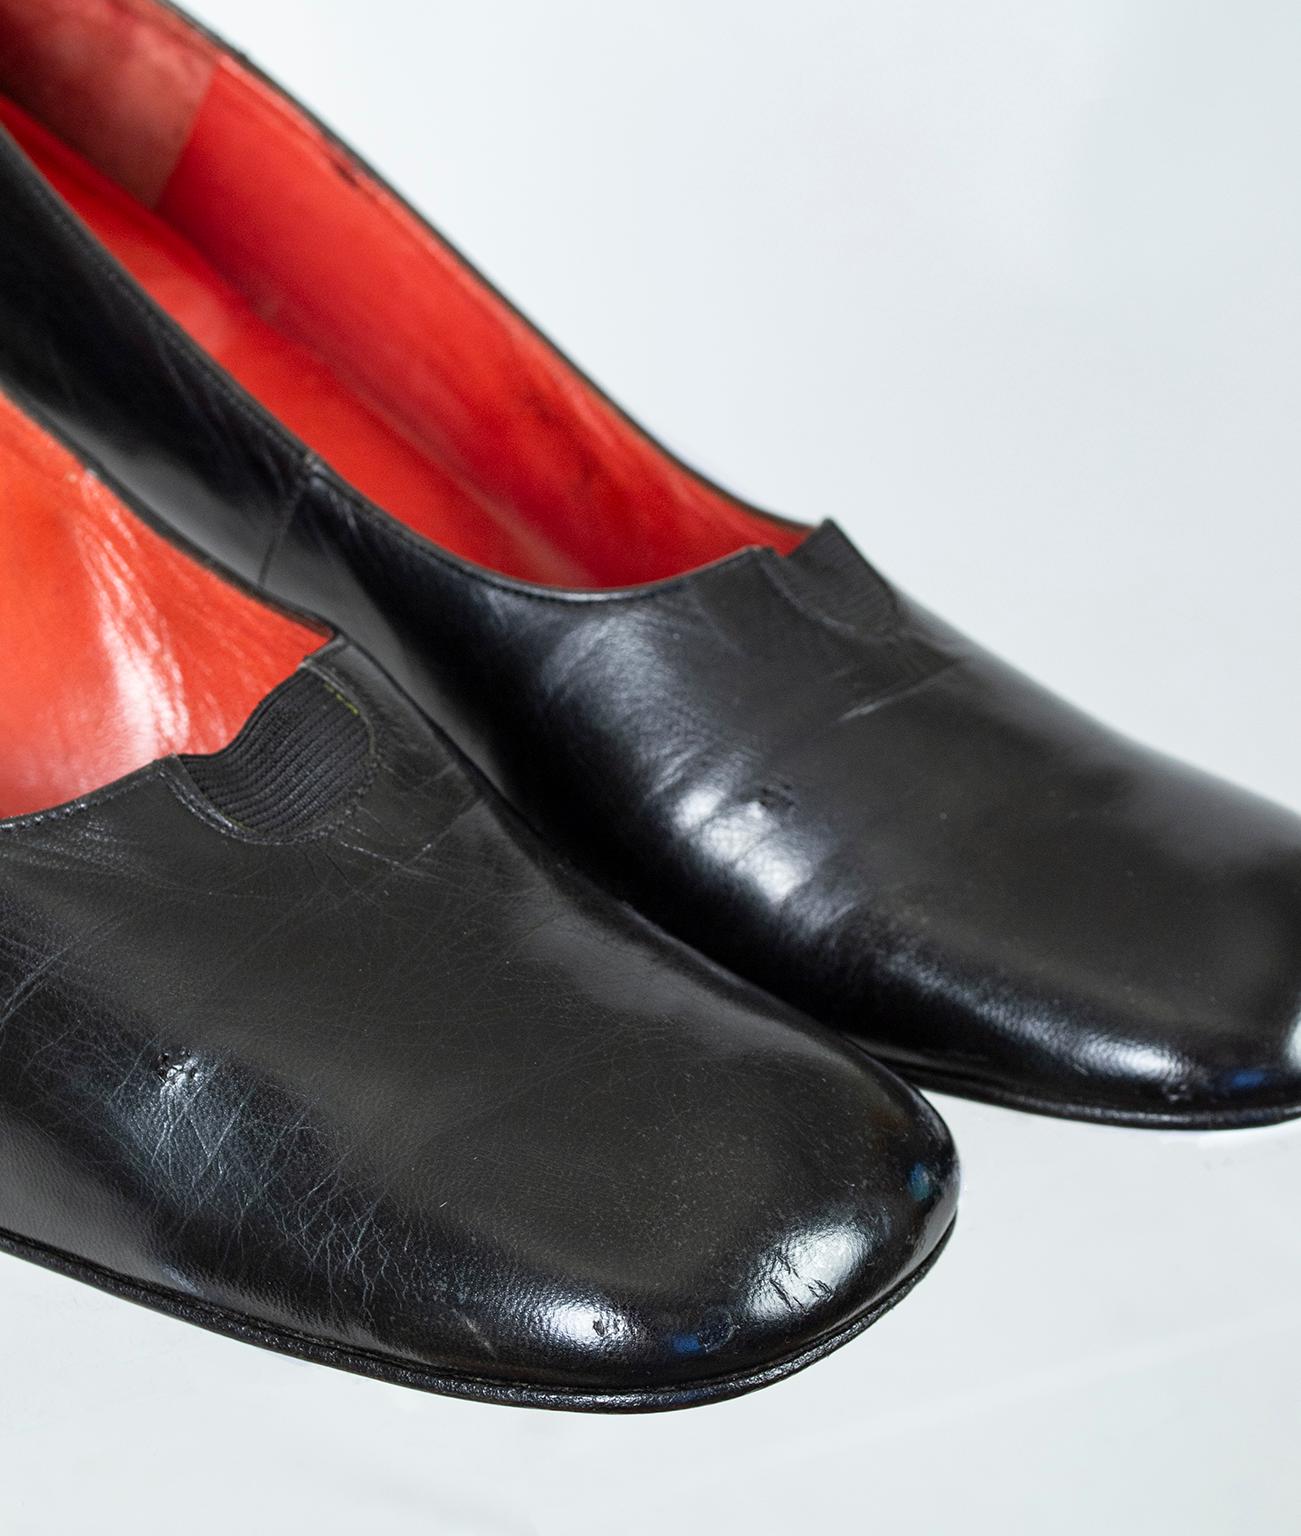 Black Souliers Christian Dior Block Heel Pumps with High Vamp – US 10, 1960s In Good Condition For Sale In Tucson, AZ